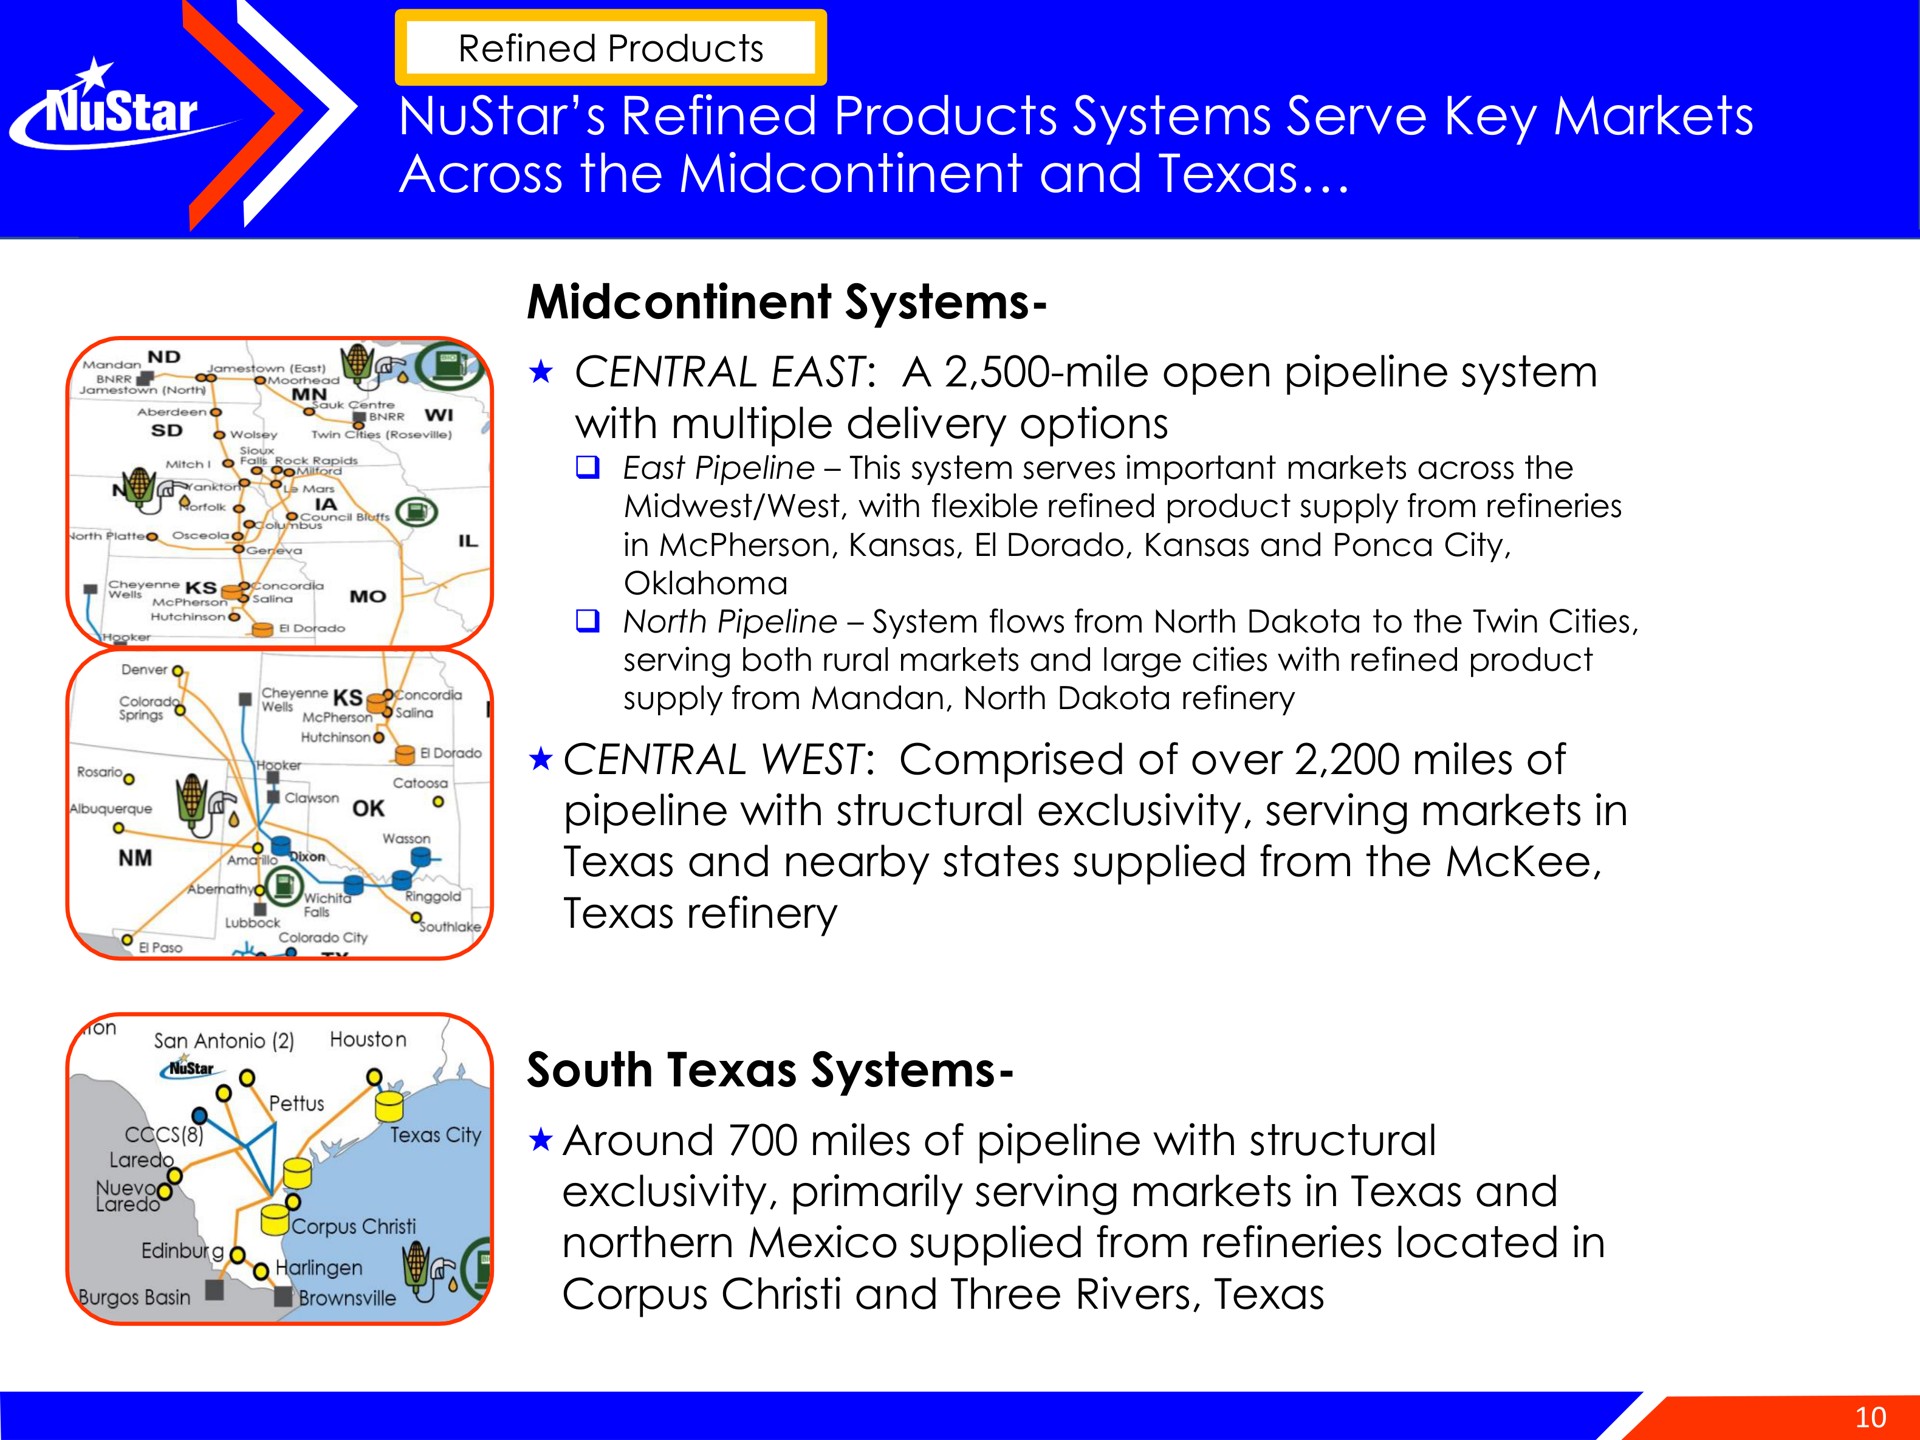 refined products systems serve key markets | NuStar Energy